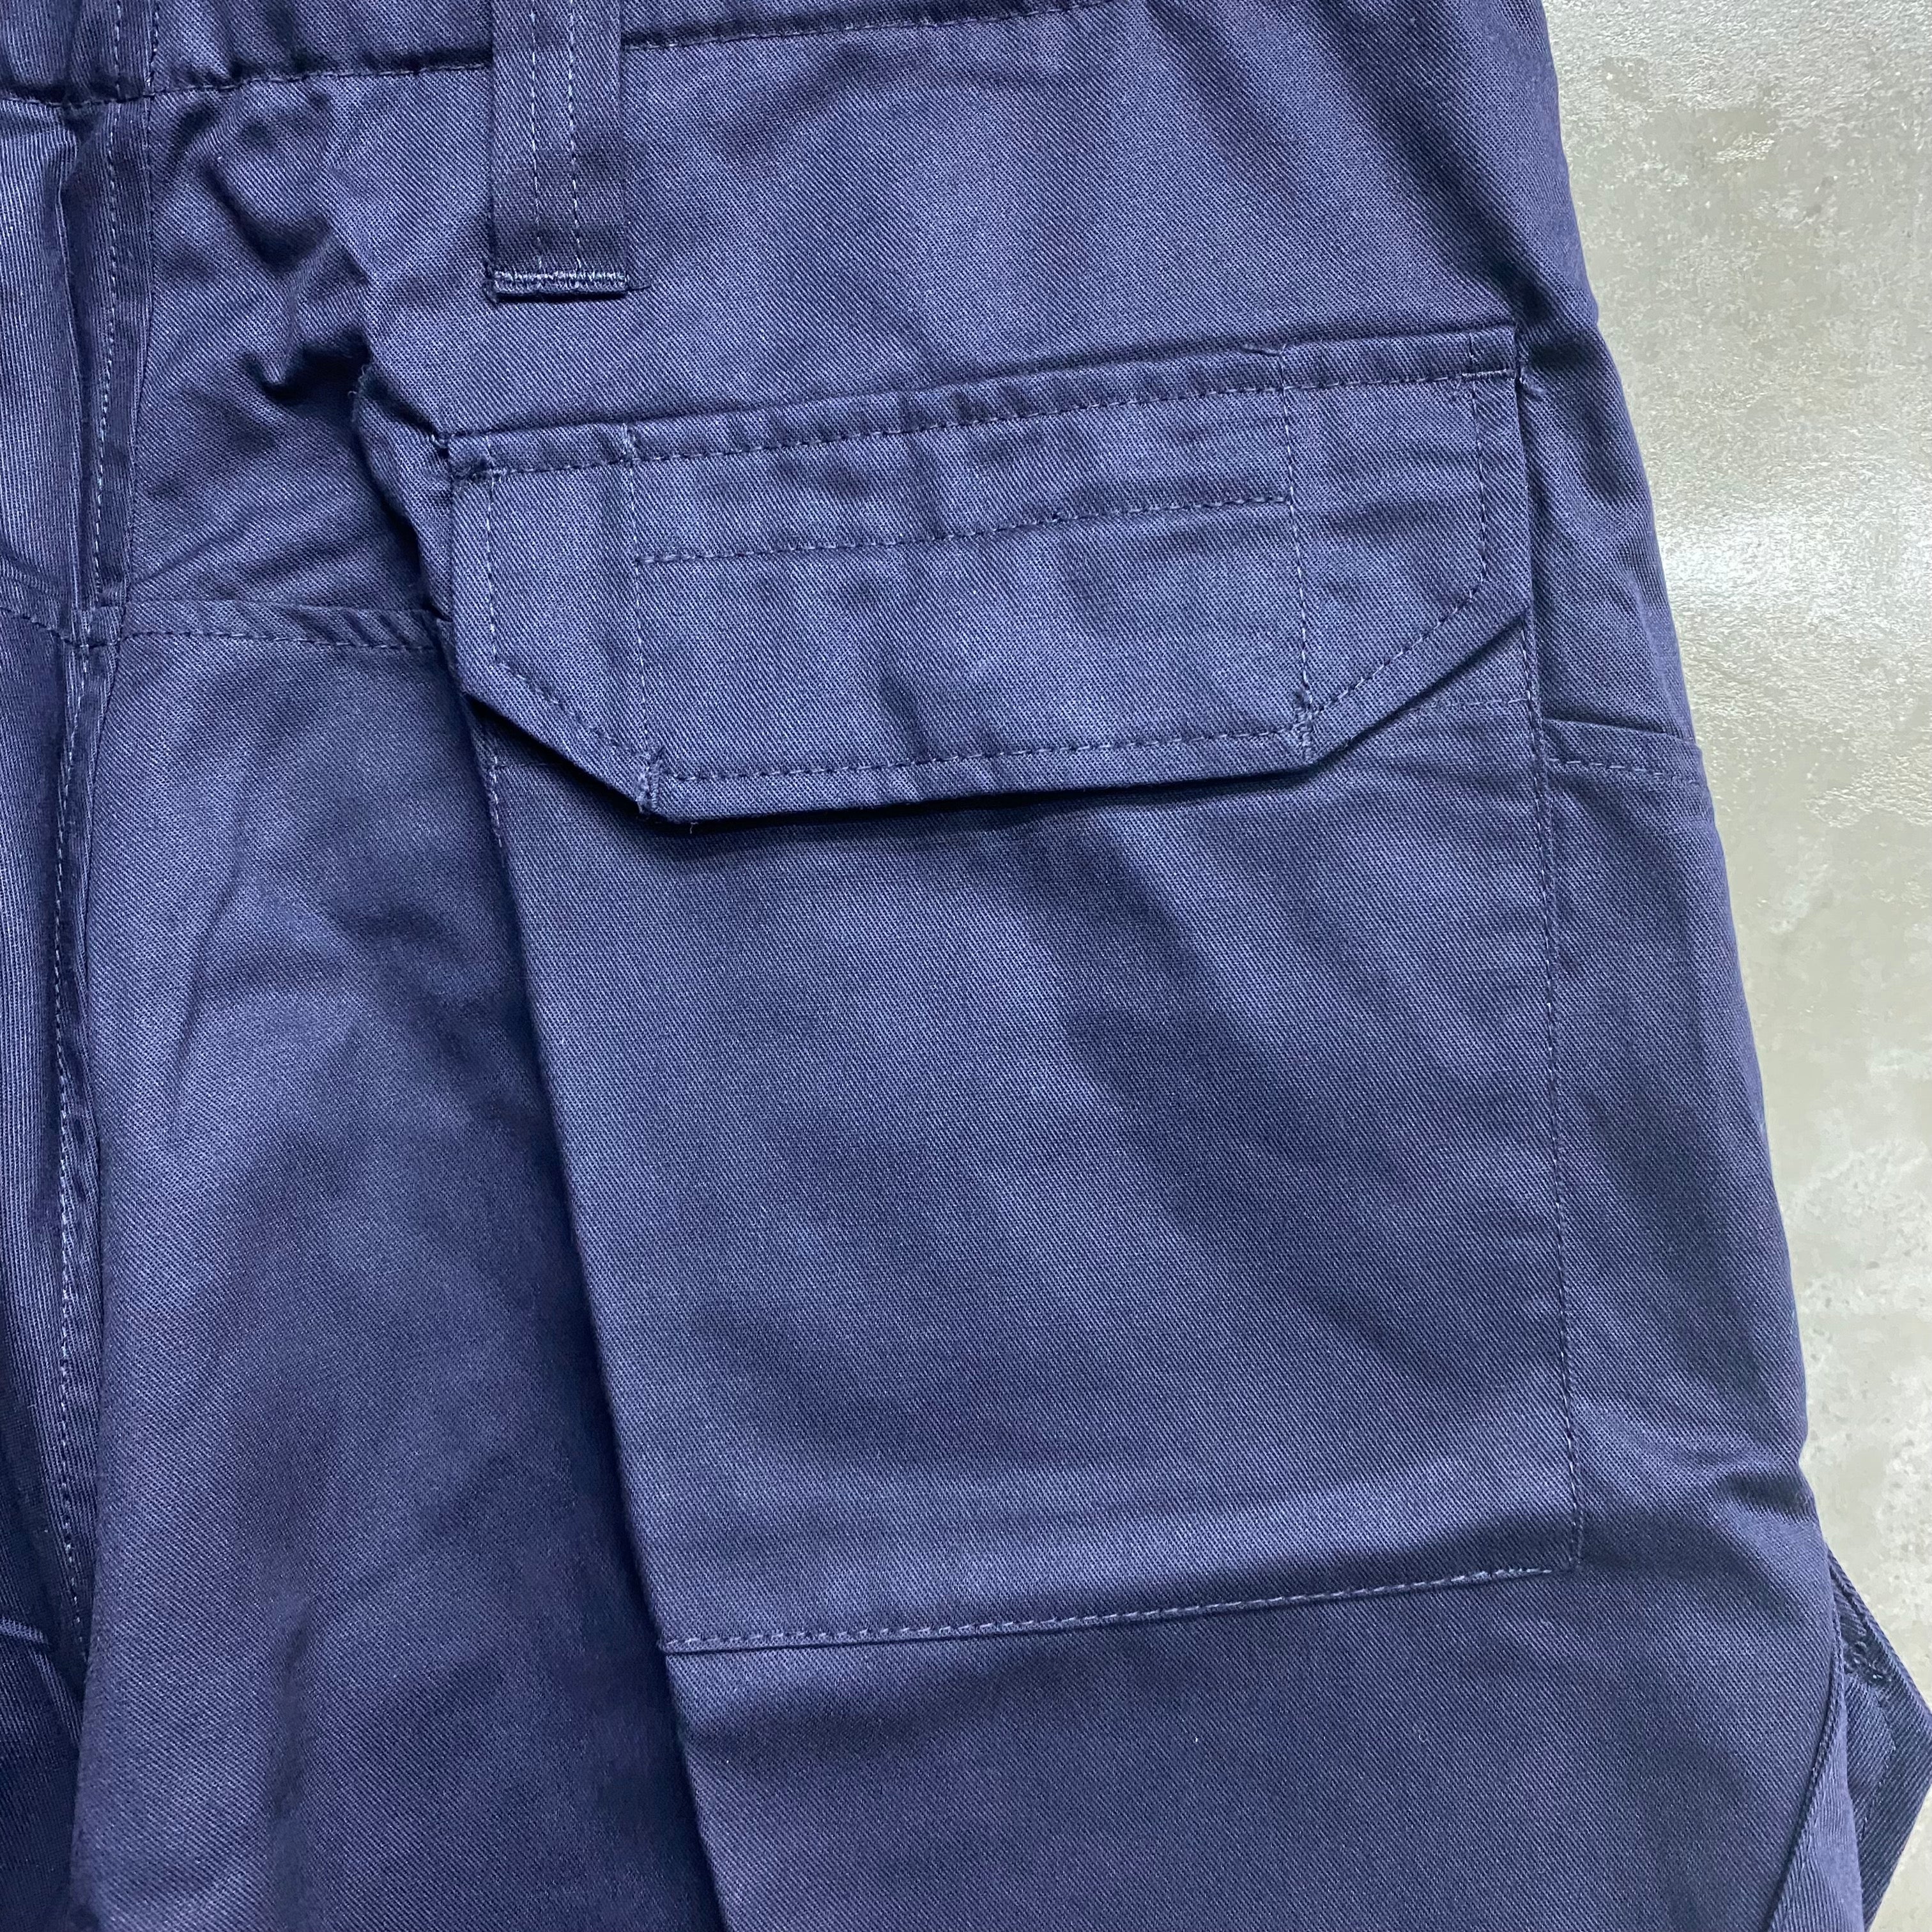 [ ONLY ONE ! ]  BRITISH ARMED FORCES ROYAL NAVY COMBAT TROUSERS / BRITISH MILITARY